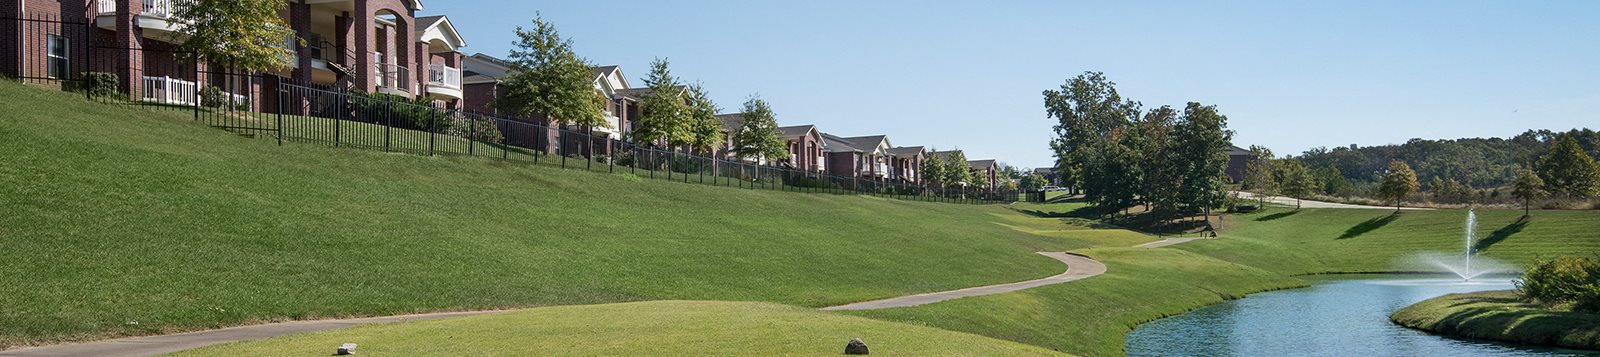 Beautiful Golf Course Views Available at The Links at Columbia, Columbia, Missouri